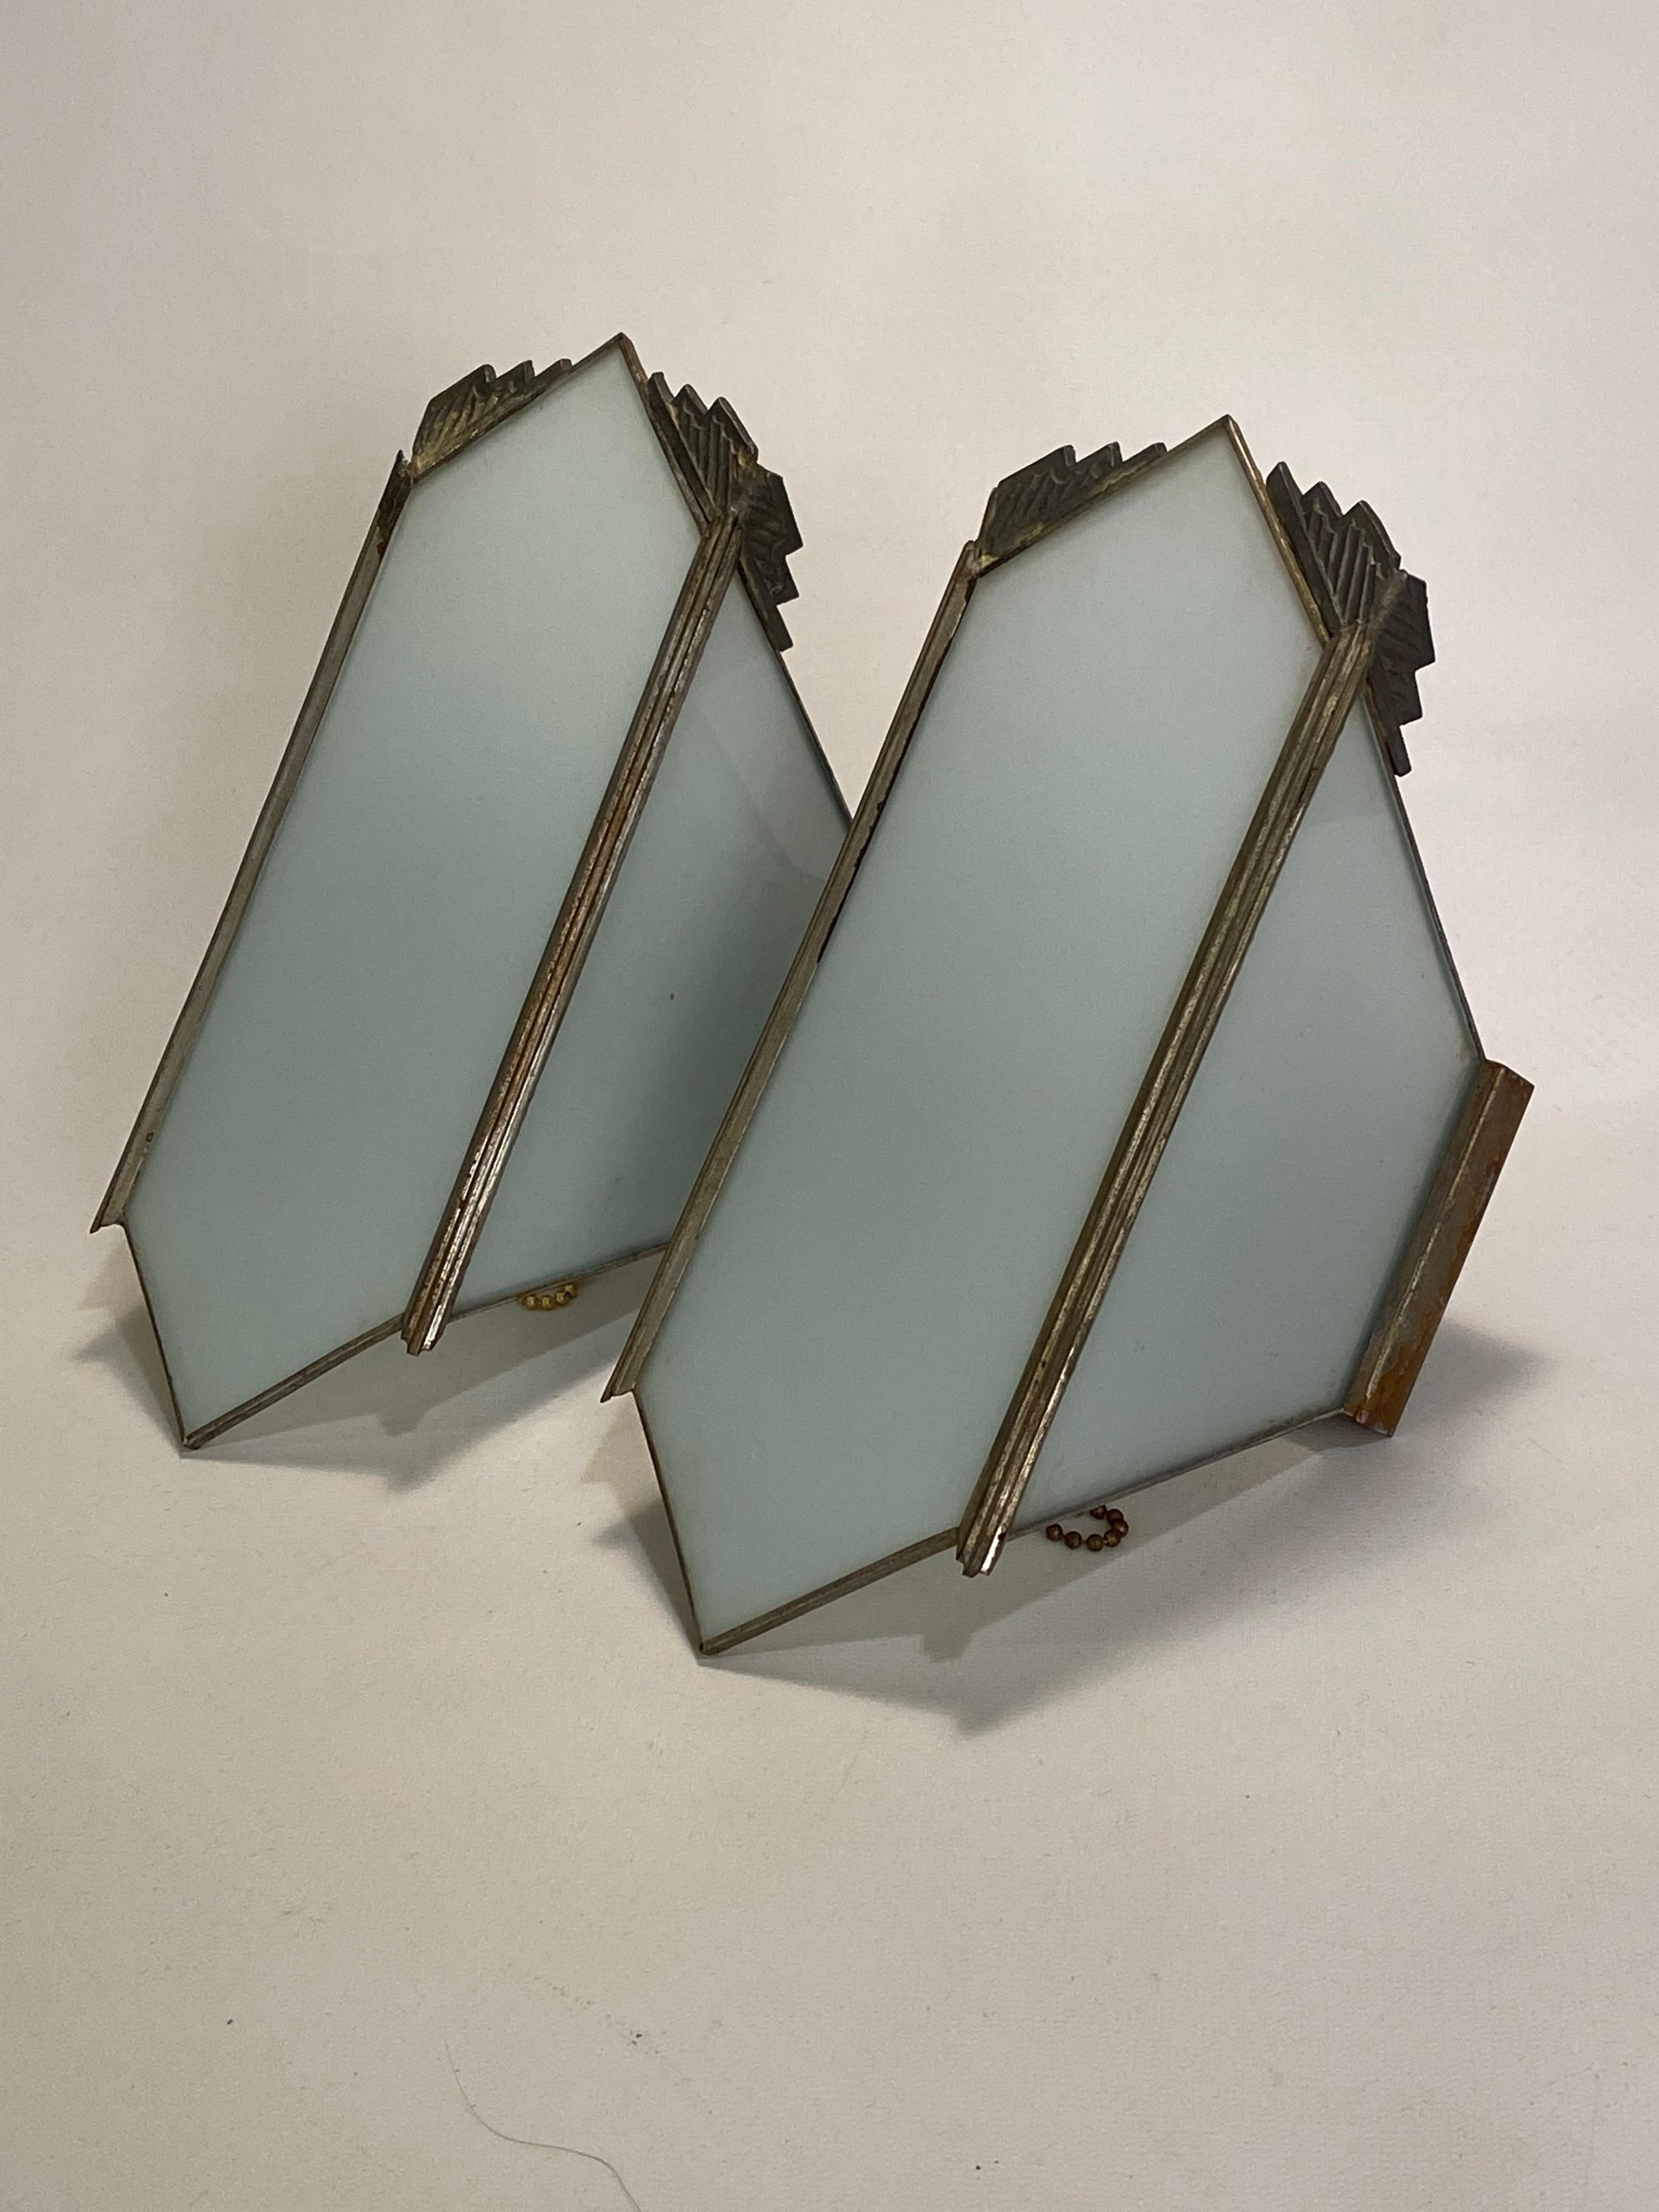 A fine pair of Art Deco three panel milk glass sconces. Just a small amount stepped metal detailing in the upper corners of the sconces and the vertical reeded exterior panel support. One front hexagonal pane of glass flanked by two trapezoidal